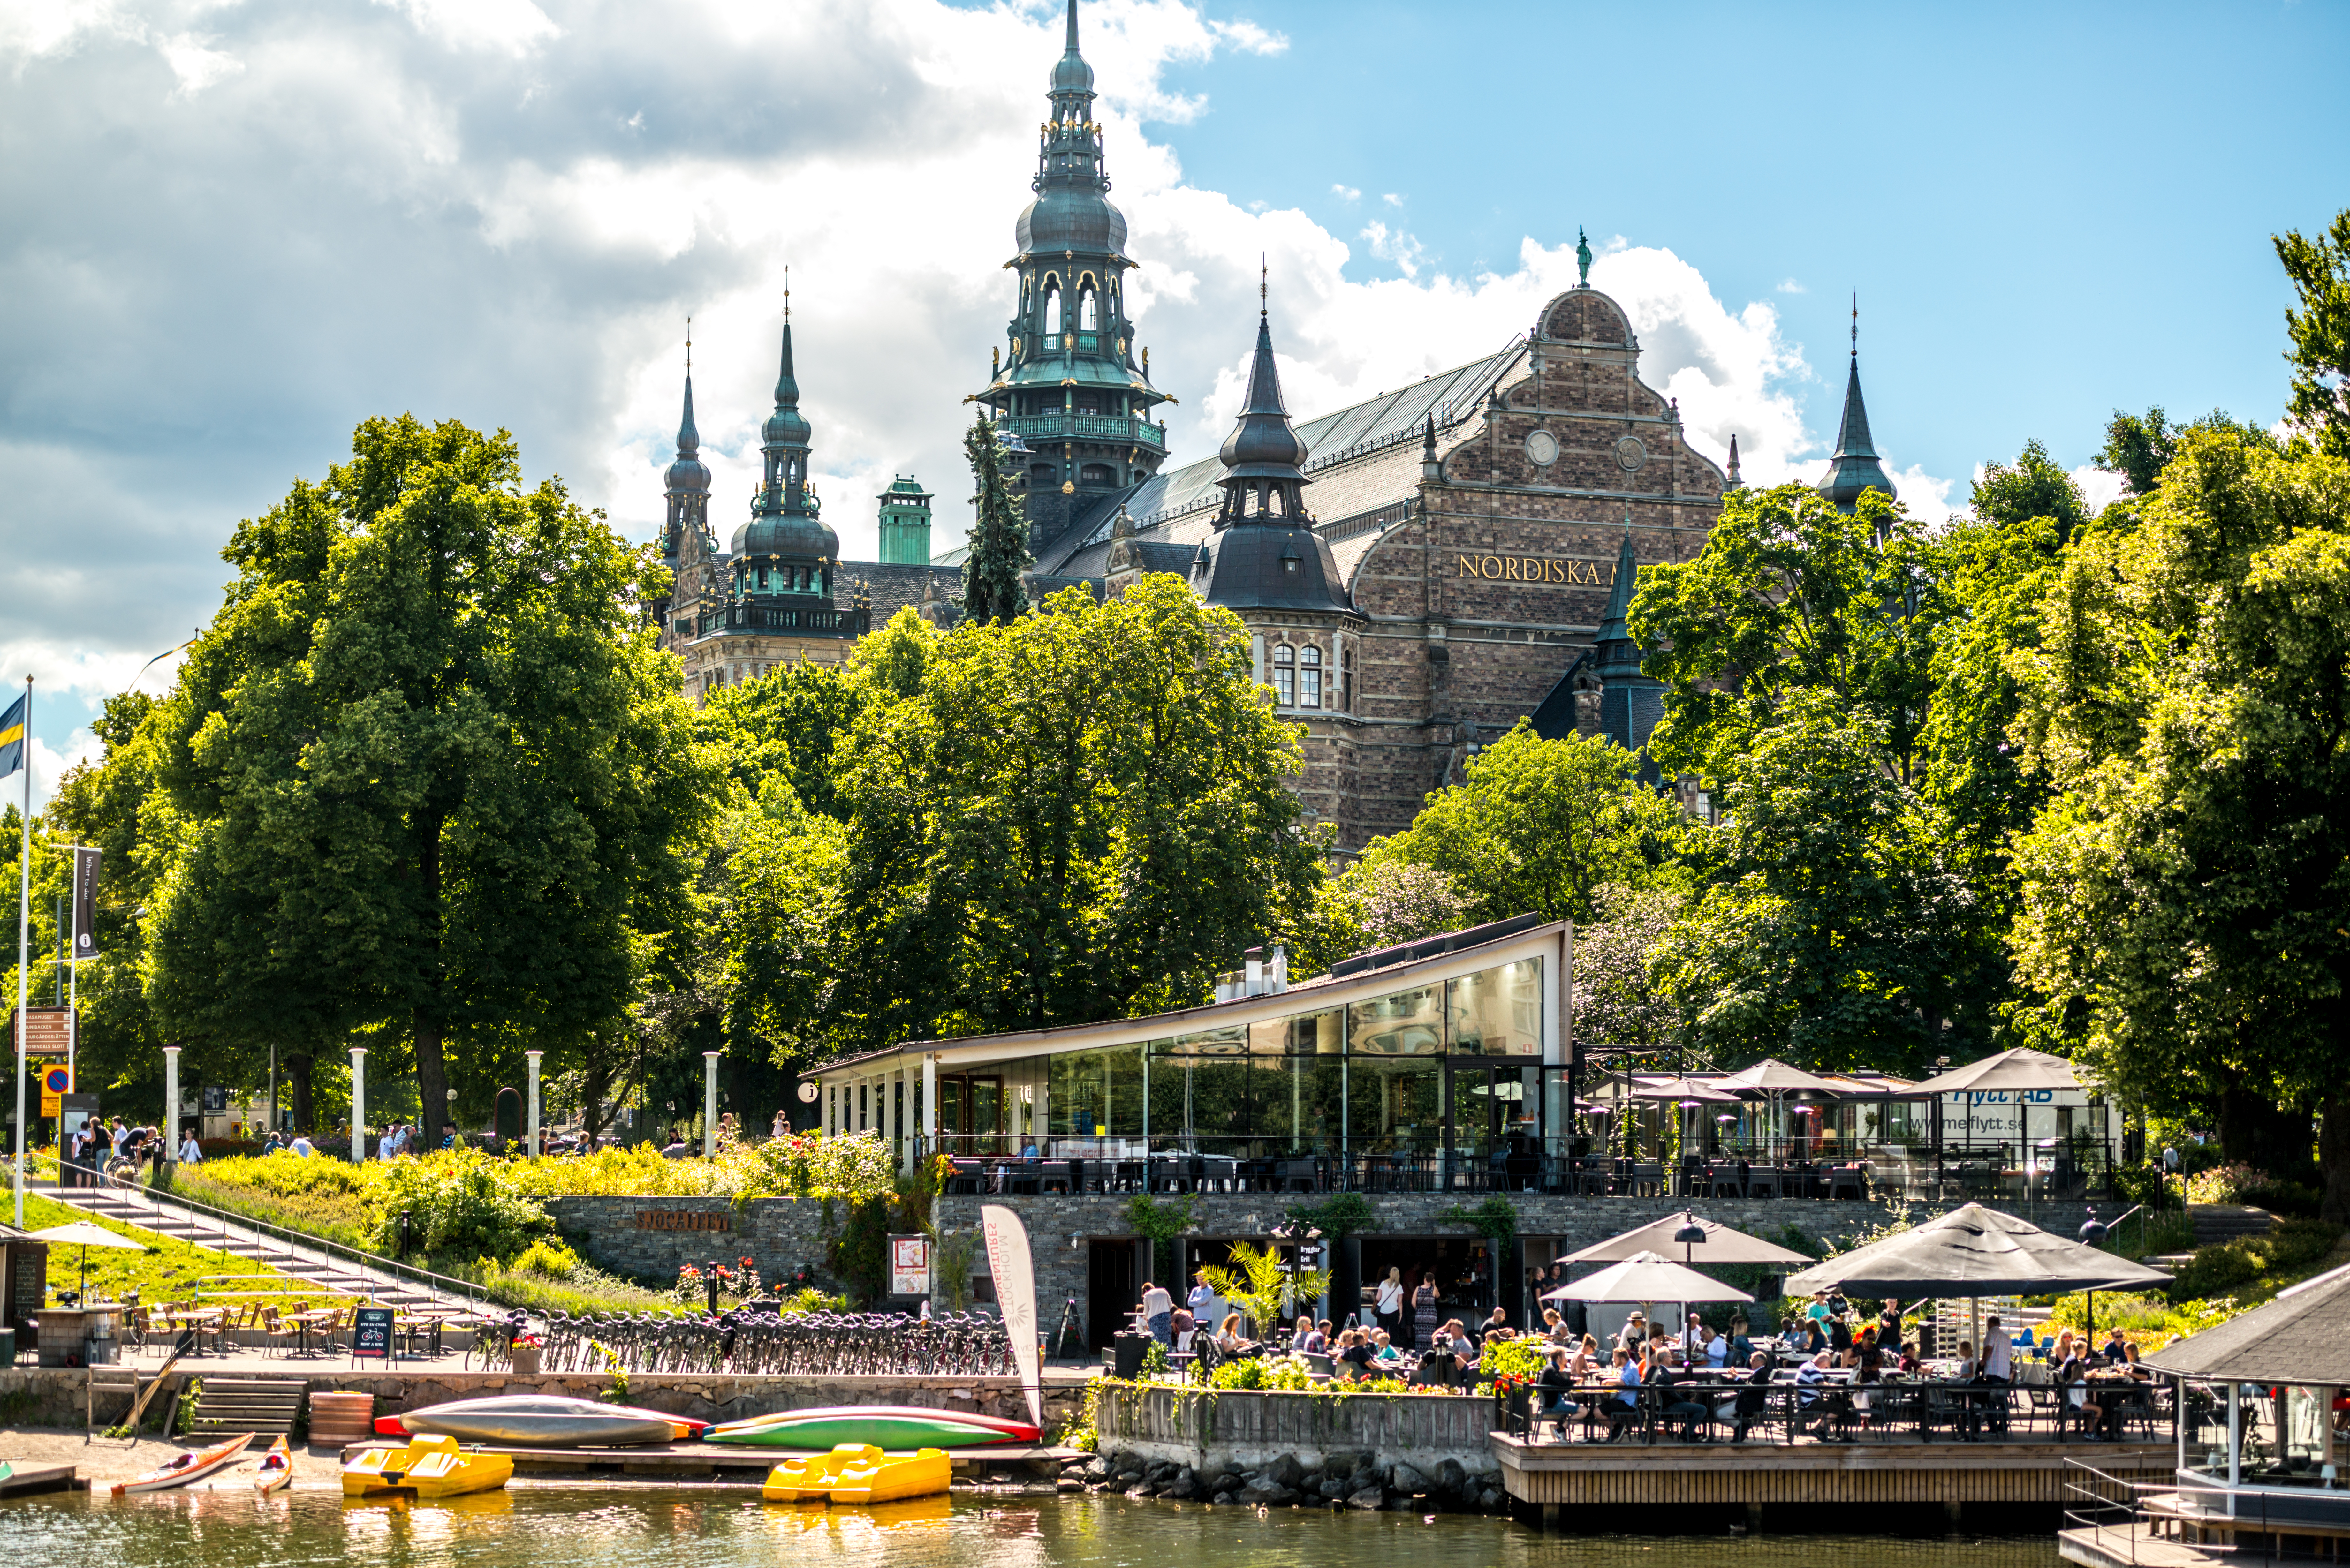 A photo of the Nordiska building in Stockholm, with a café in front, taken by the water’s edge. 